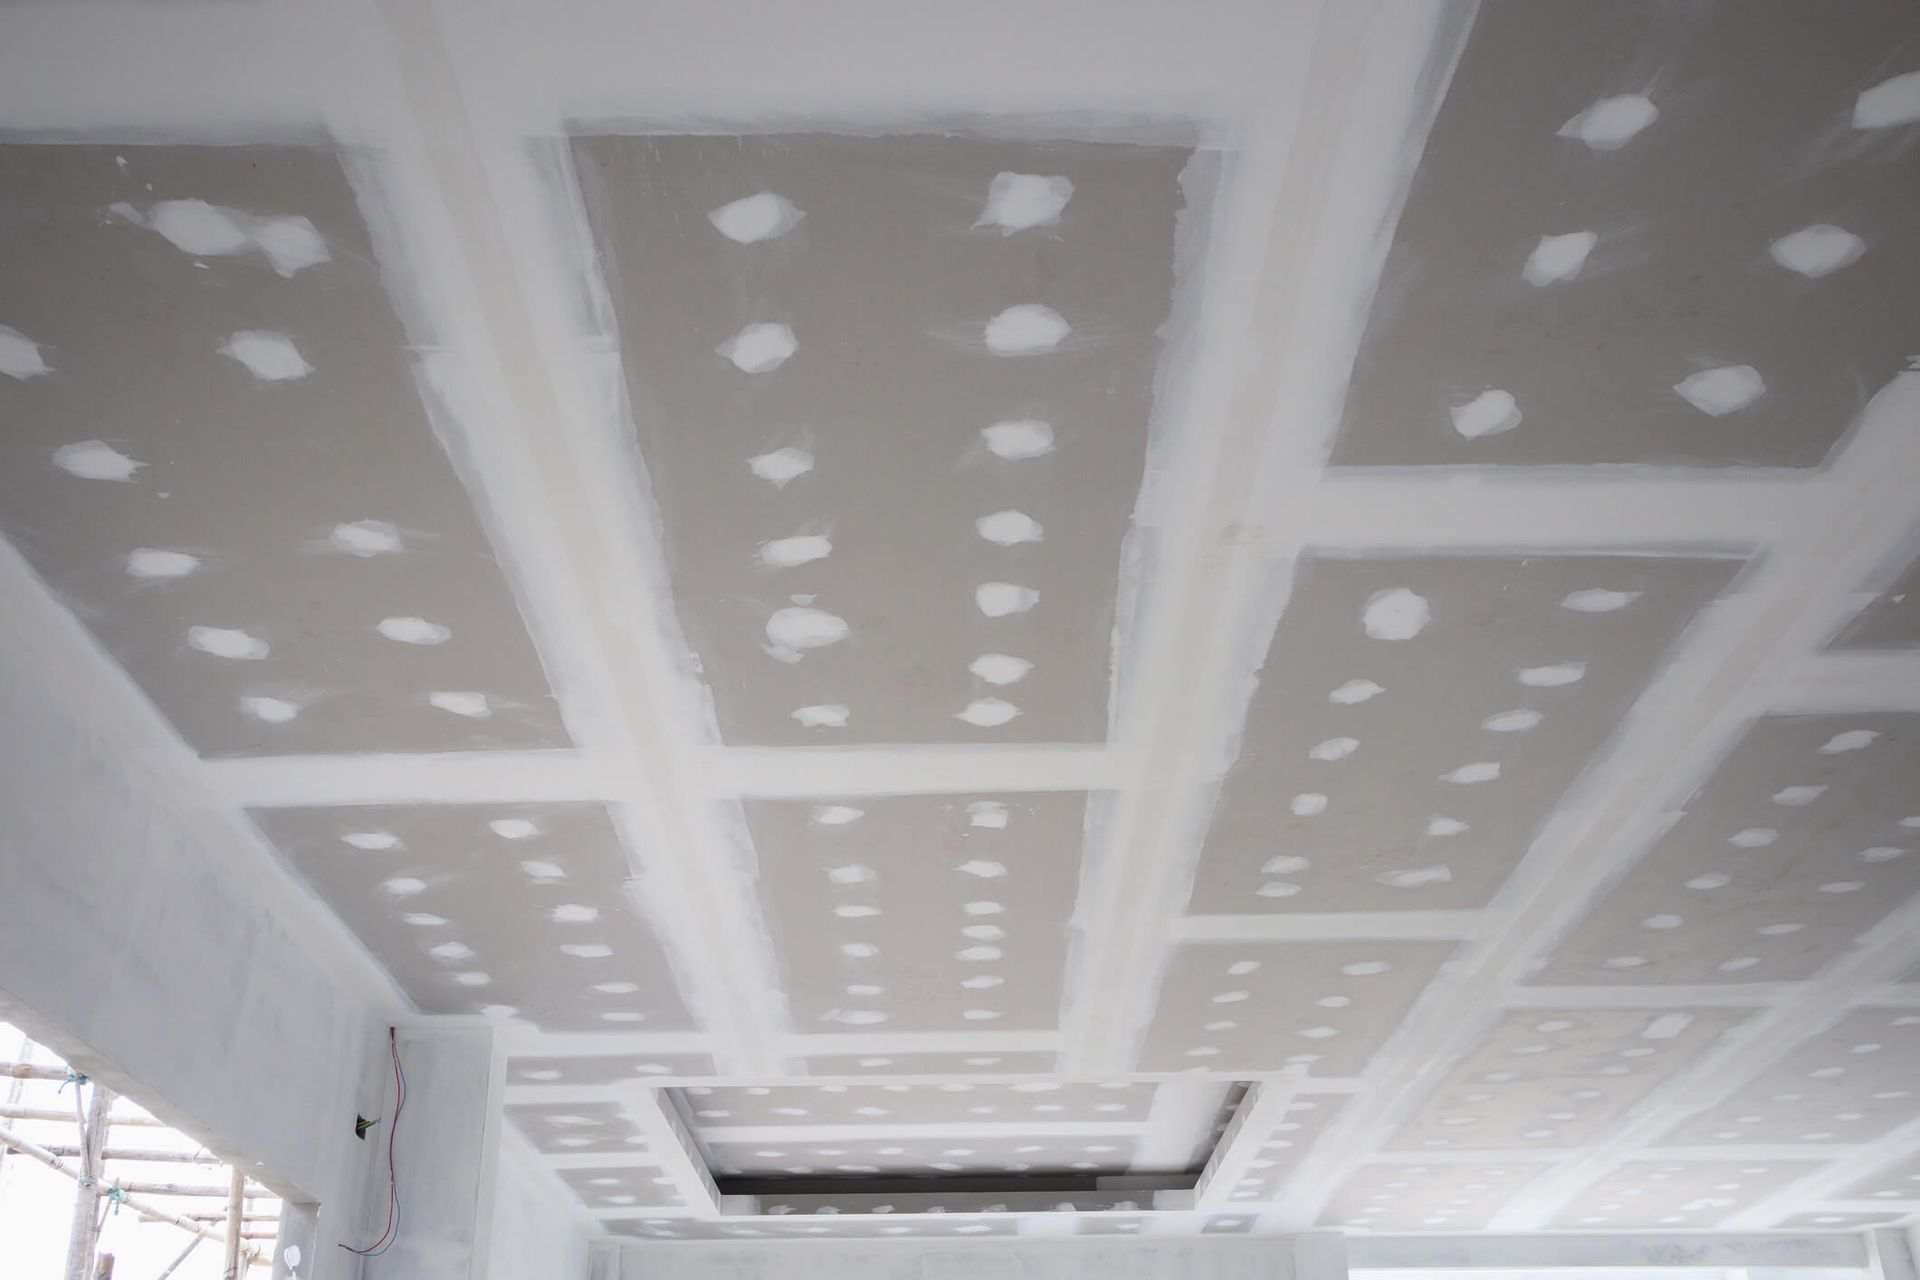 Ceiling repair services done in Lakewood, Co home